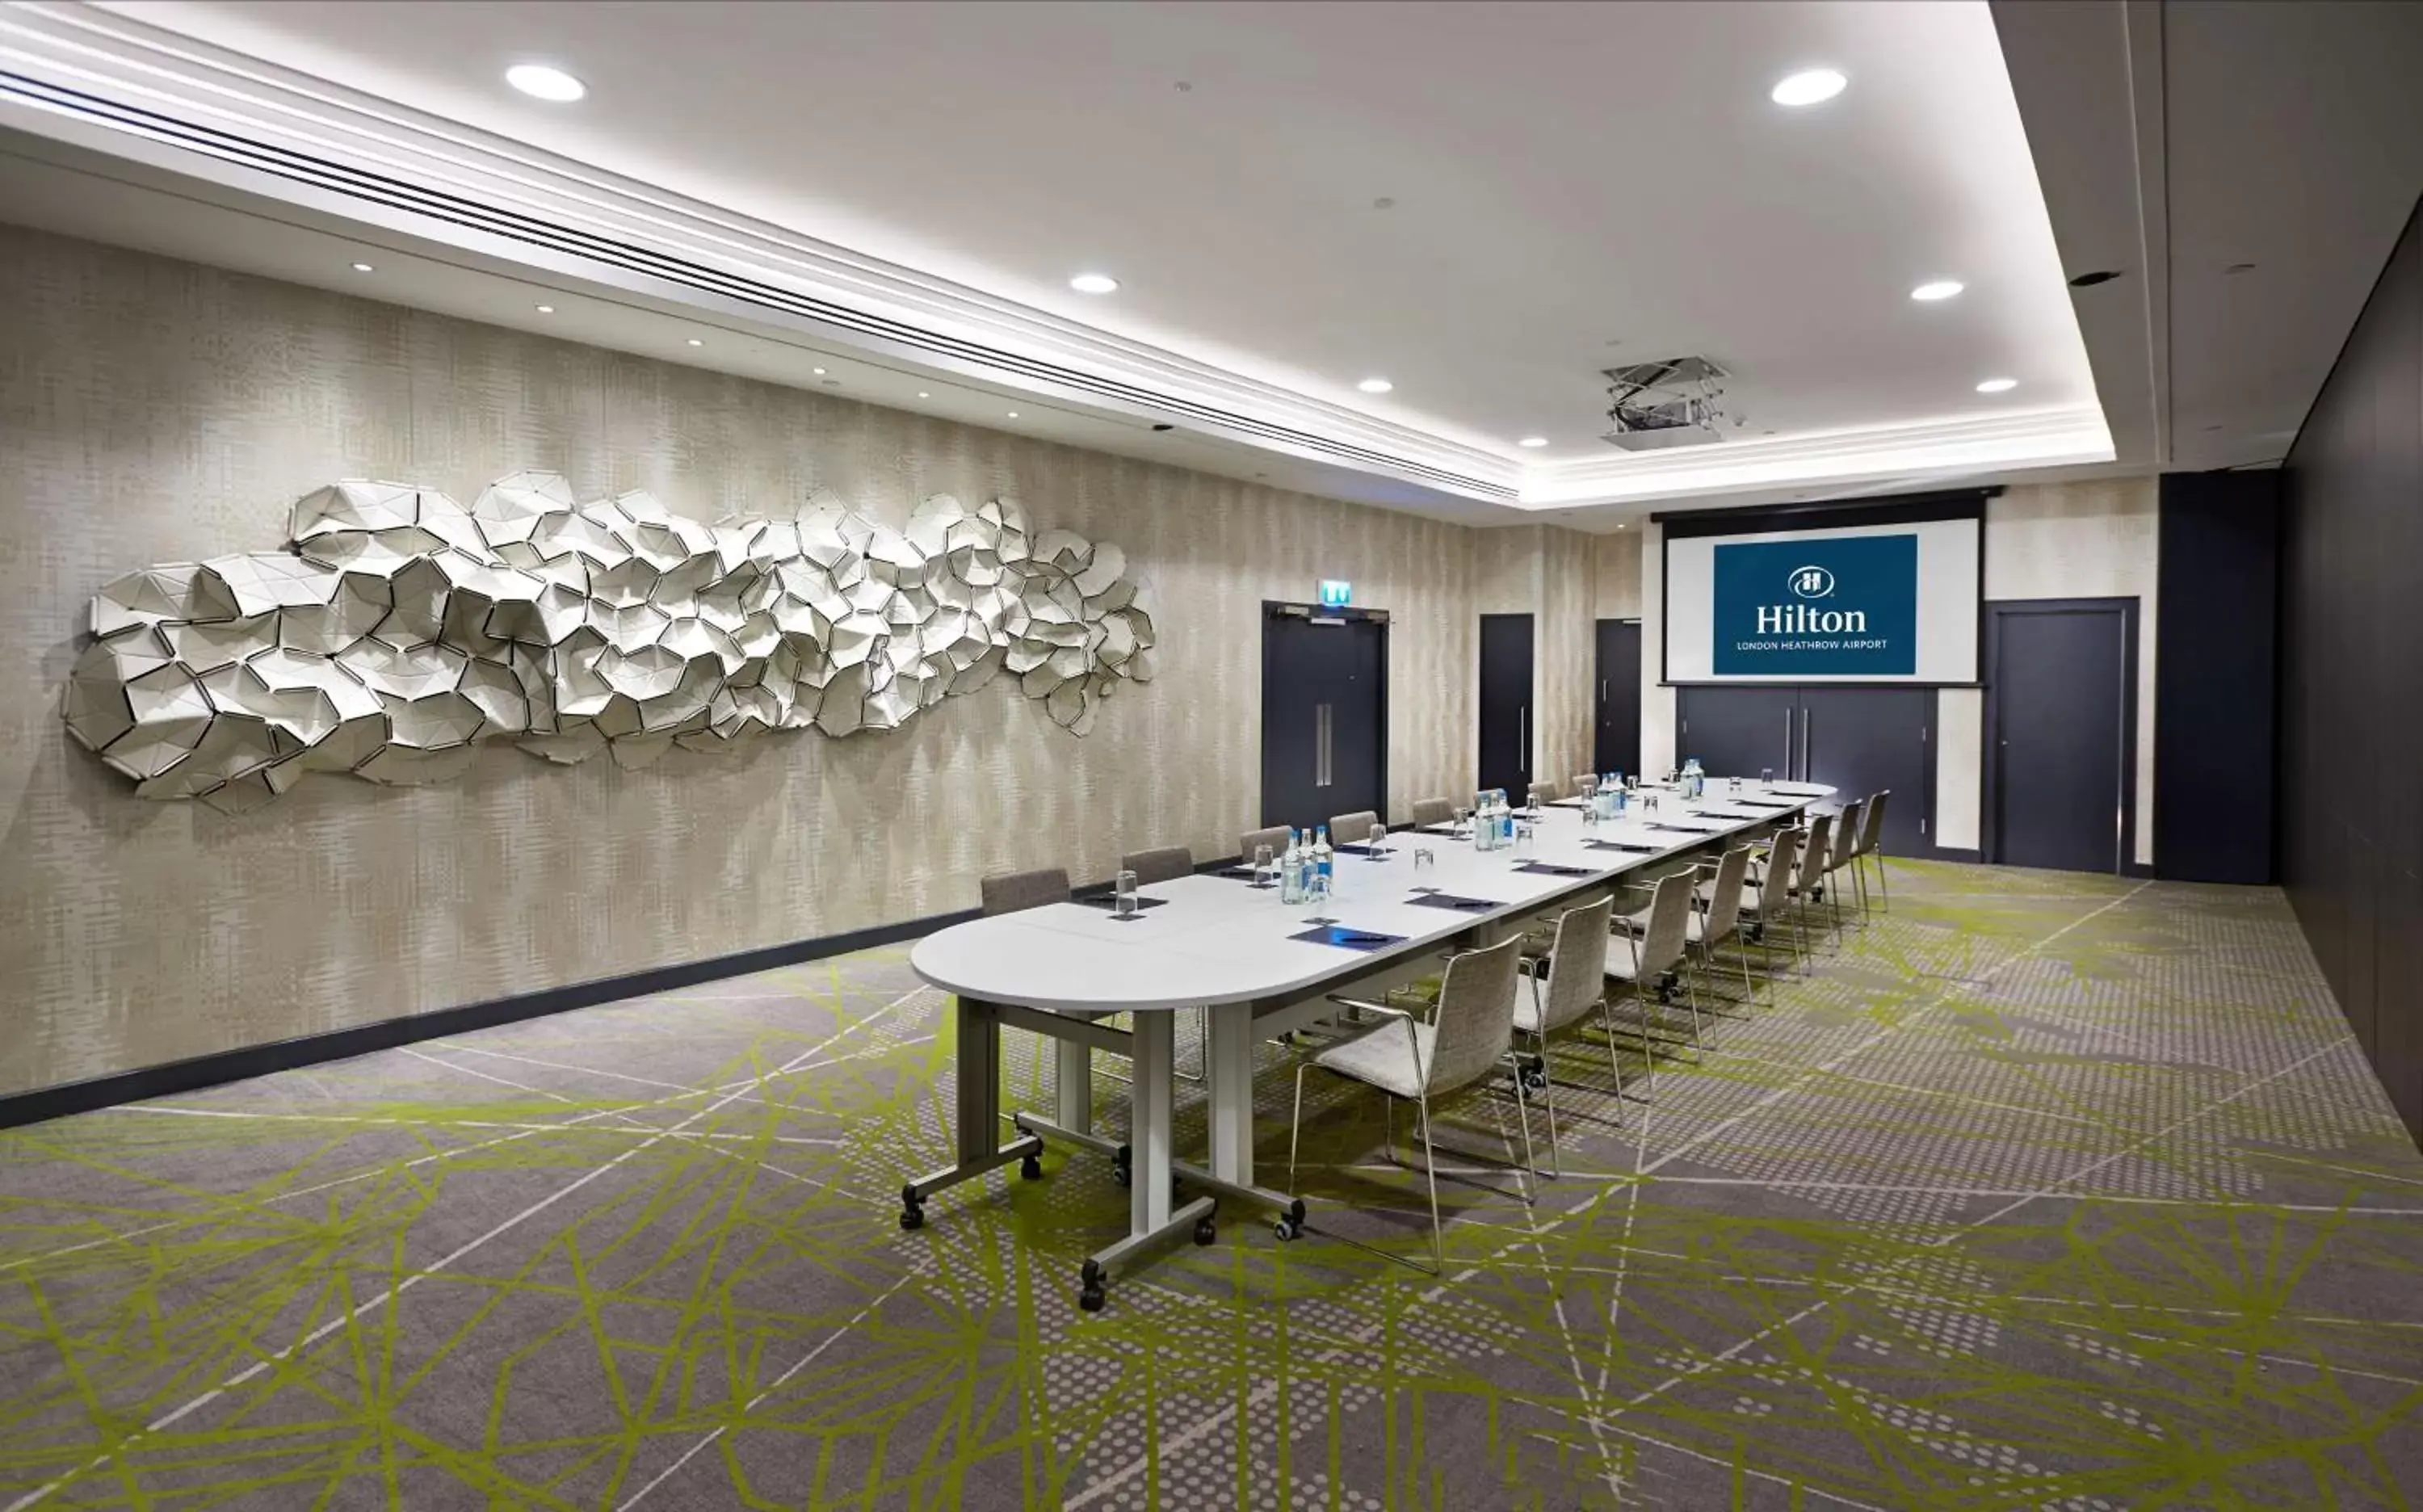 Meeting/conference room in Hilton London Heathrow Airport